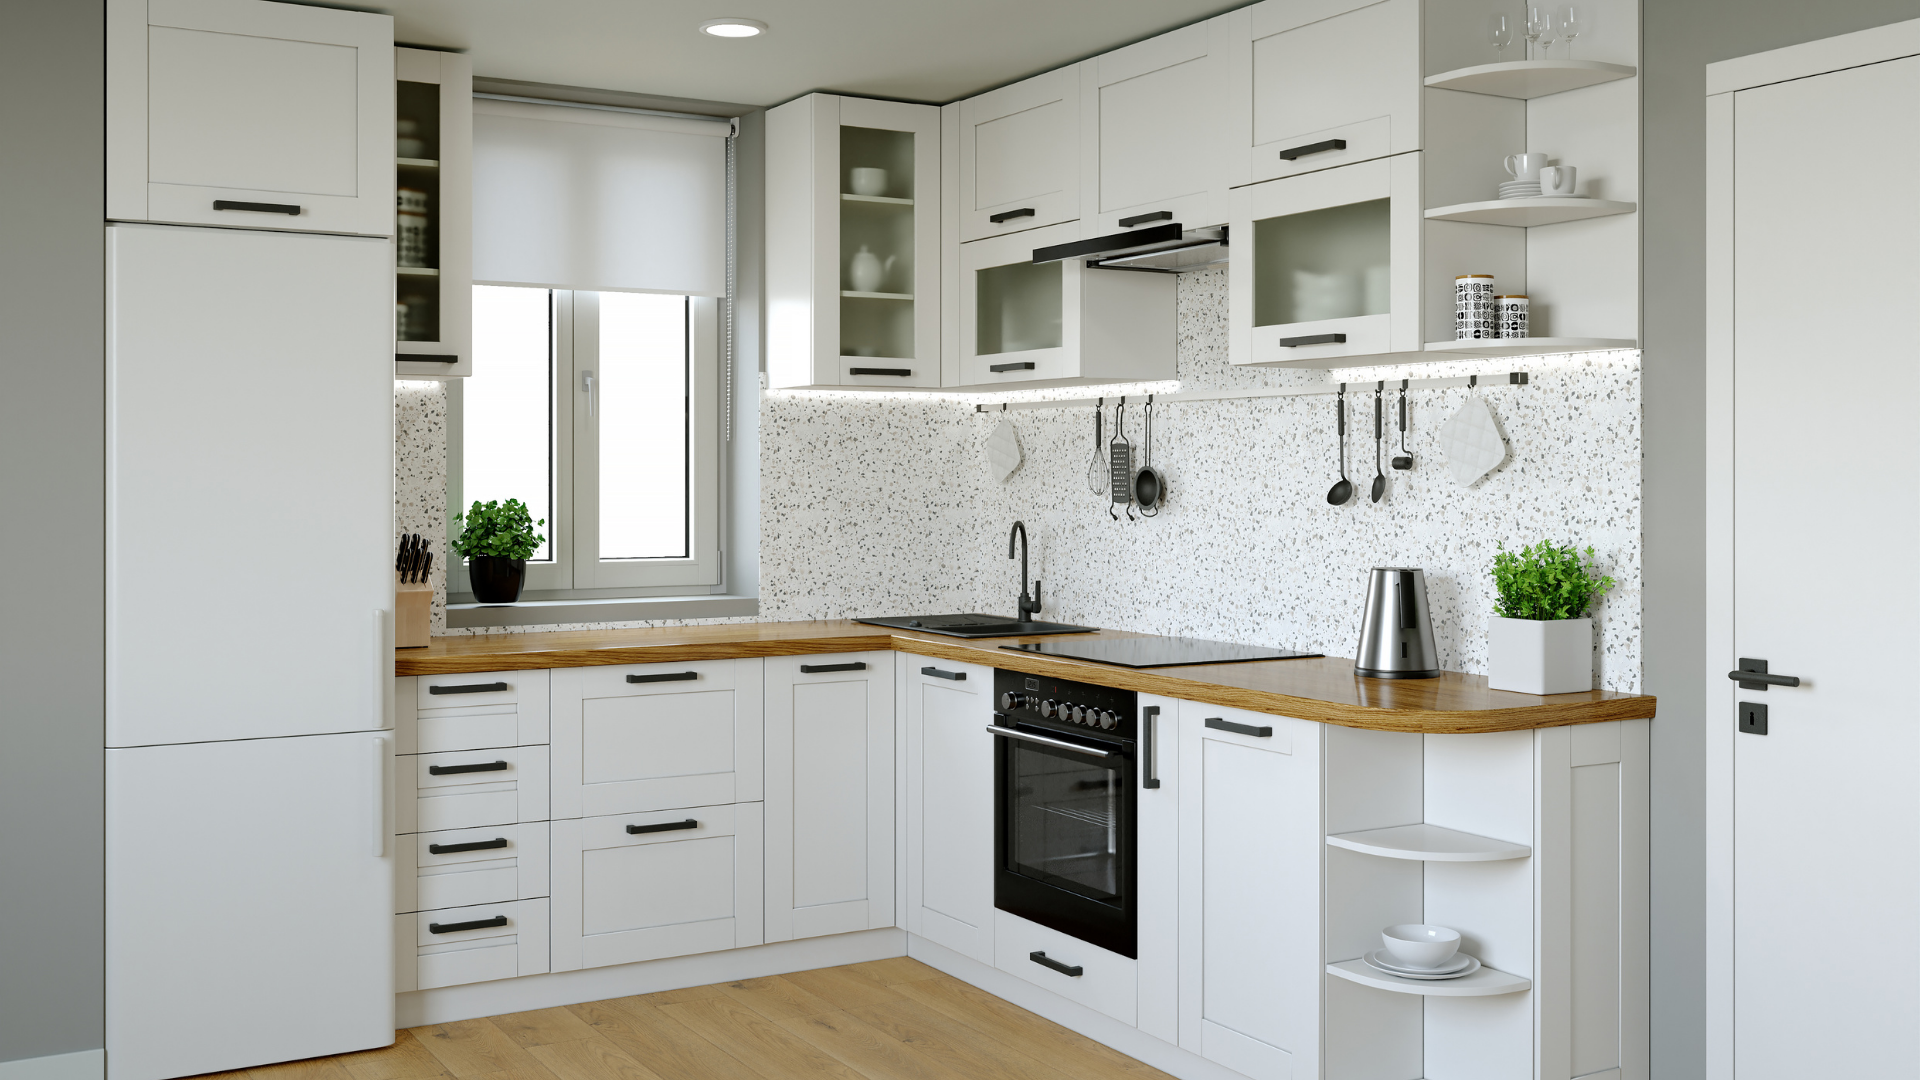 https://floorily.com/wp-content/uploads/2023/08/Small-kitchen-ideas-2023-white-cabinets-and-vertical-organization.png